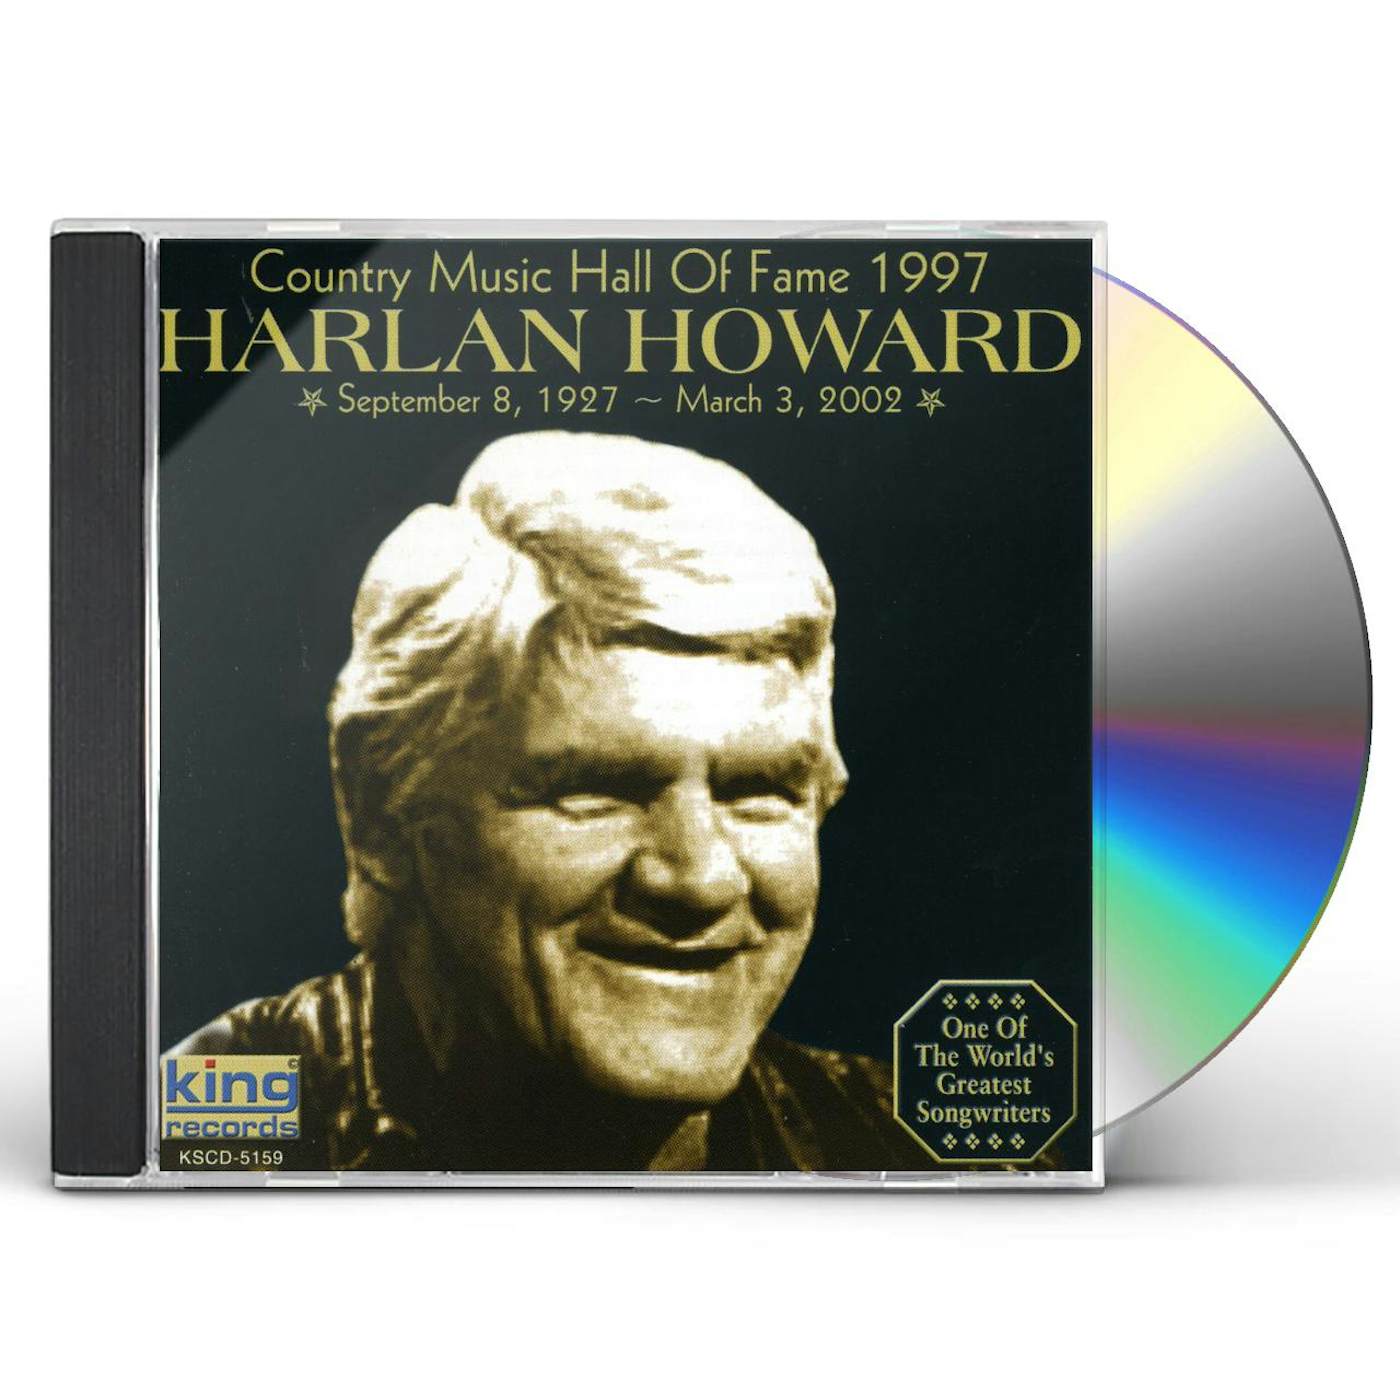 Harlan Howard COUNTRY MUSIC HALL OF FAME 1997 CD